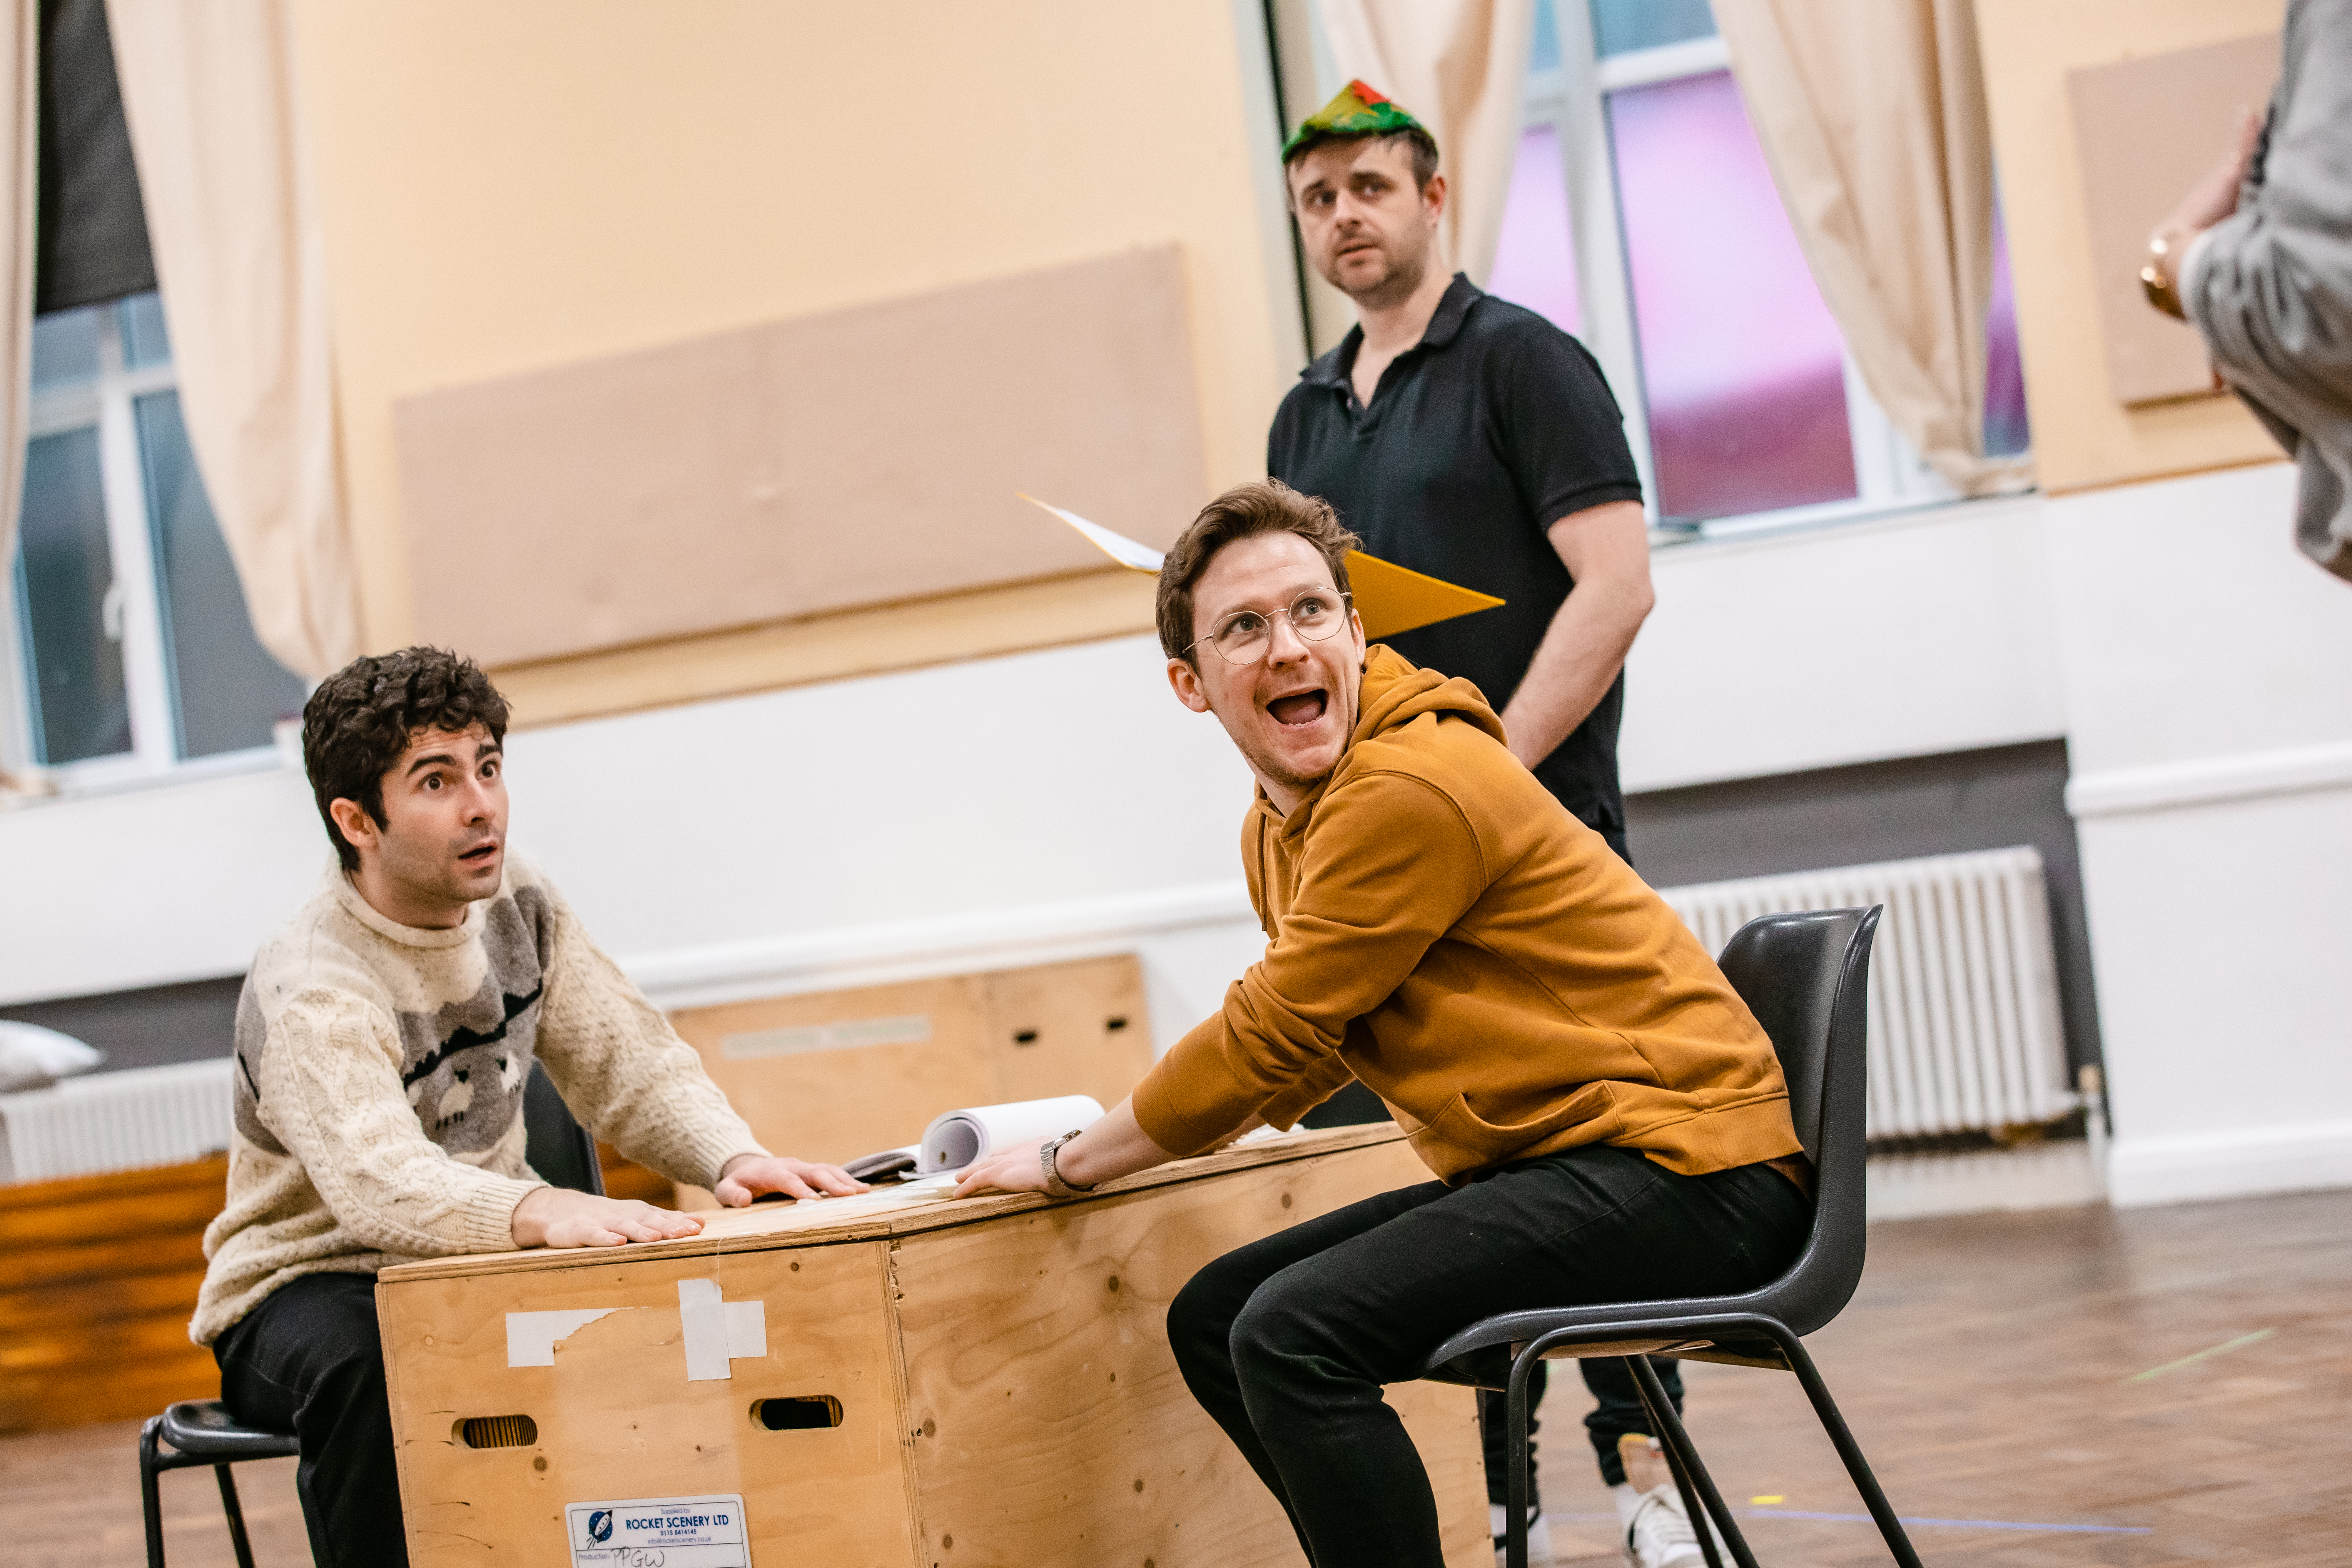 Bartley Booz, Matthew Cavendish, and Chris Leask in rehearsals for Peter Pan Goes Wrong. Photo by Danny Kaan.